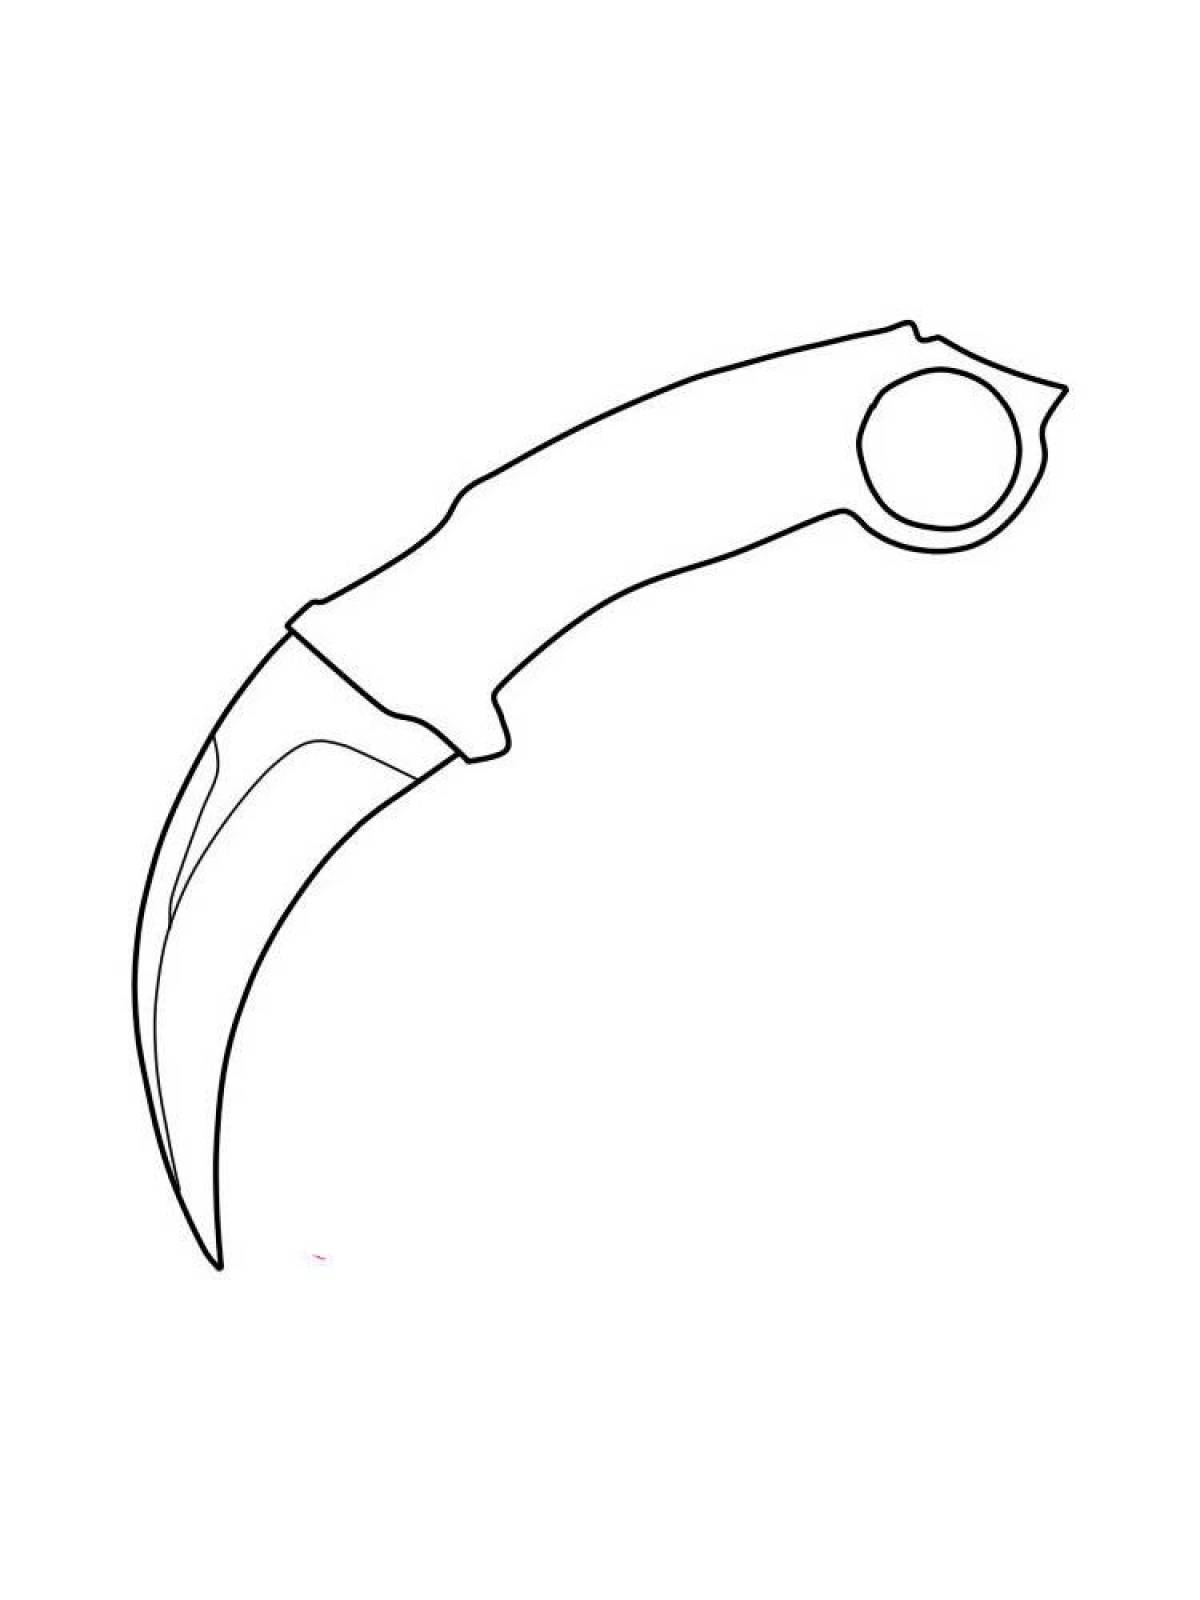 Colorfully shaded karambit from standoff 2